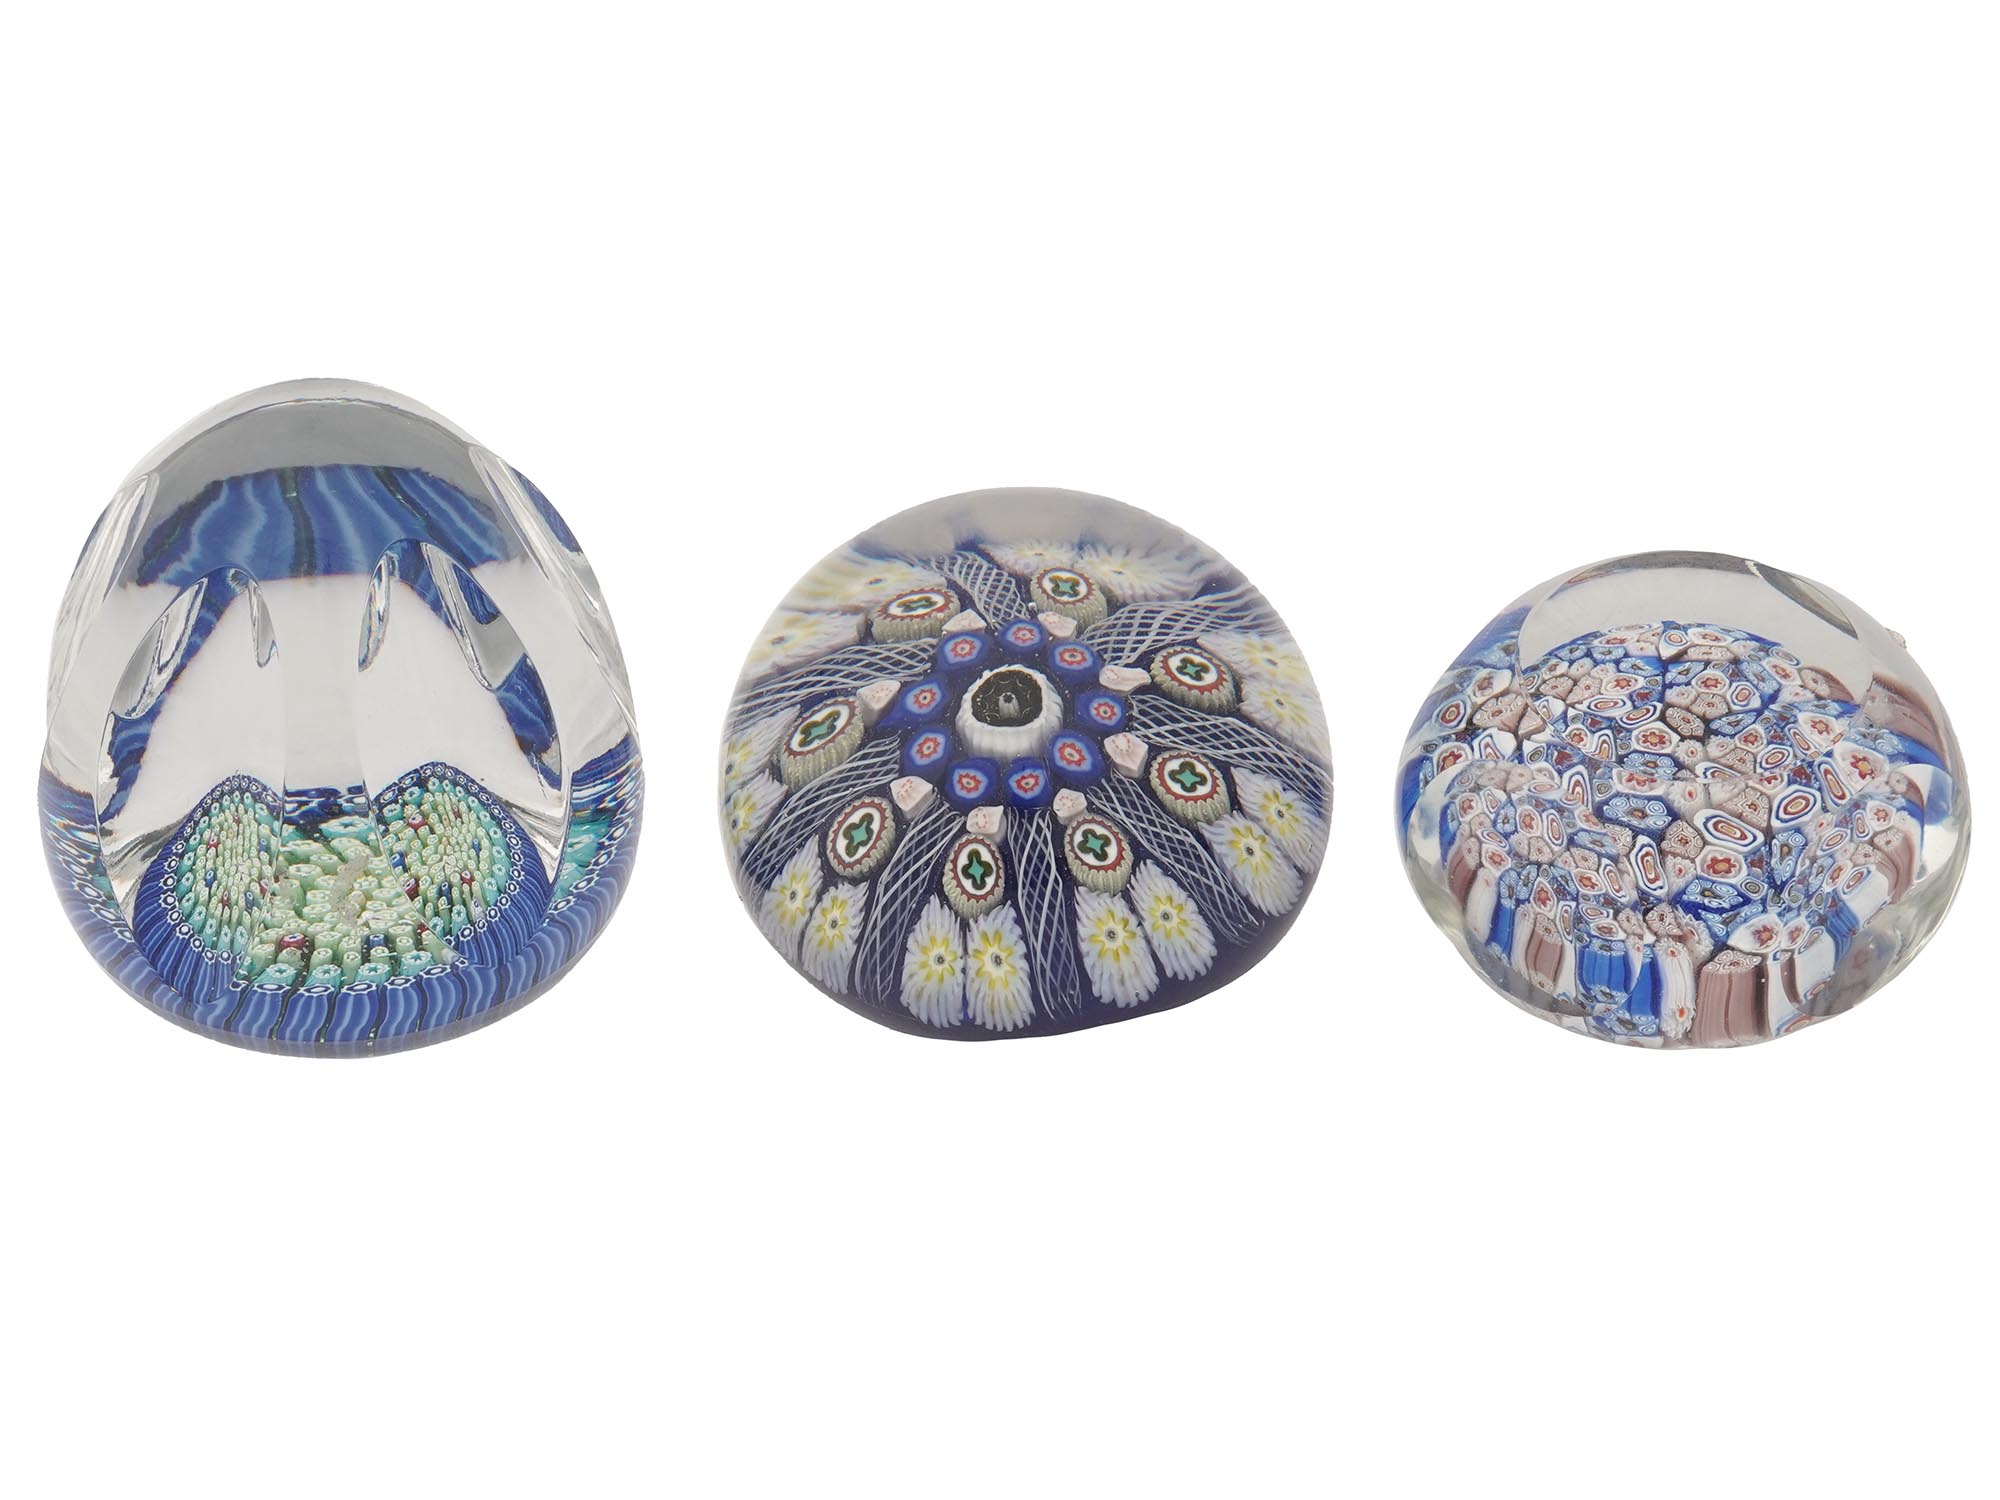 GROUP OF NINE HAND MADE ART GLASS PAPER WEIGHTS PIC-2